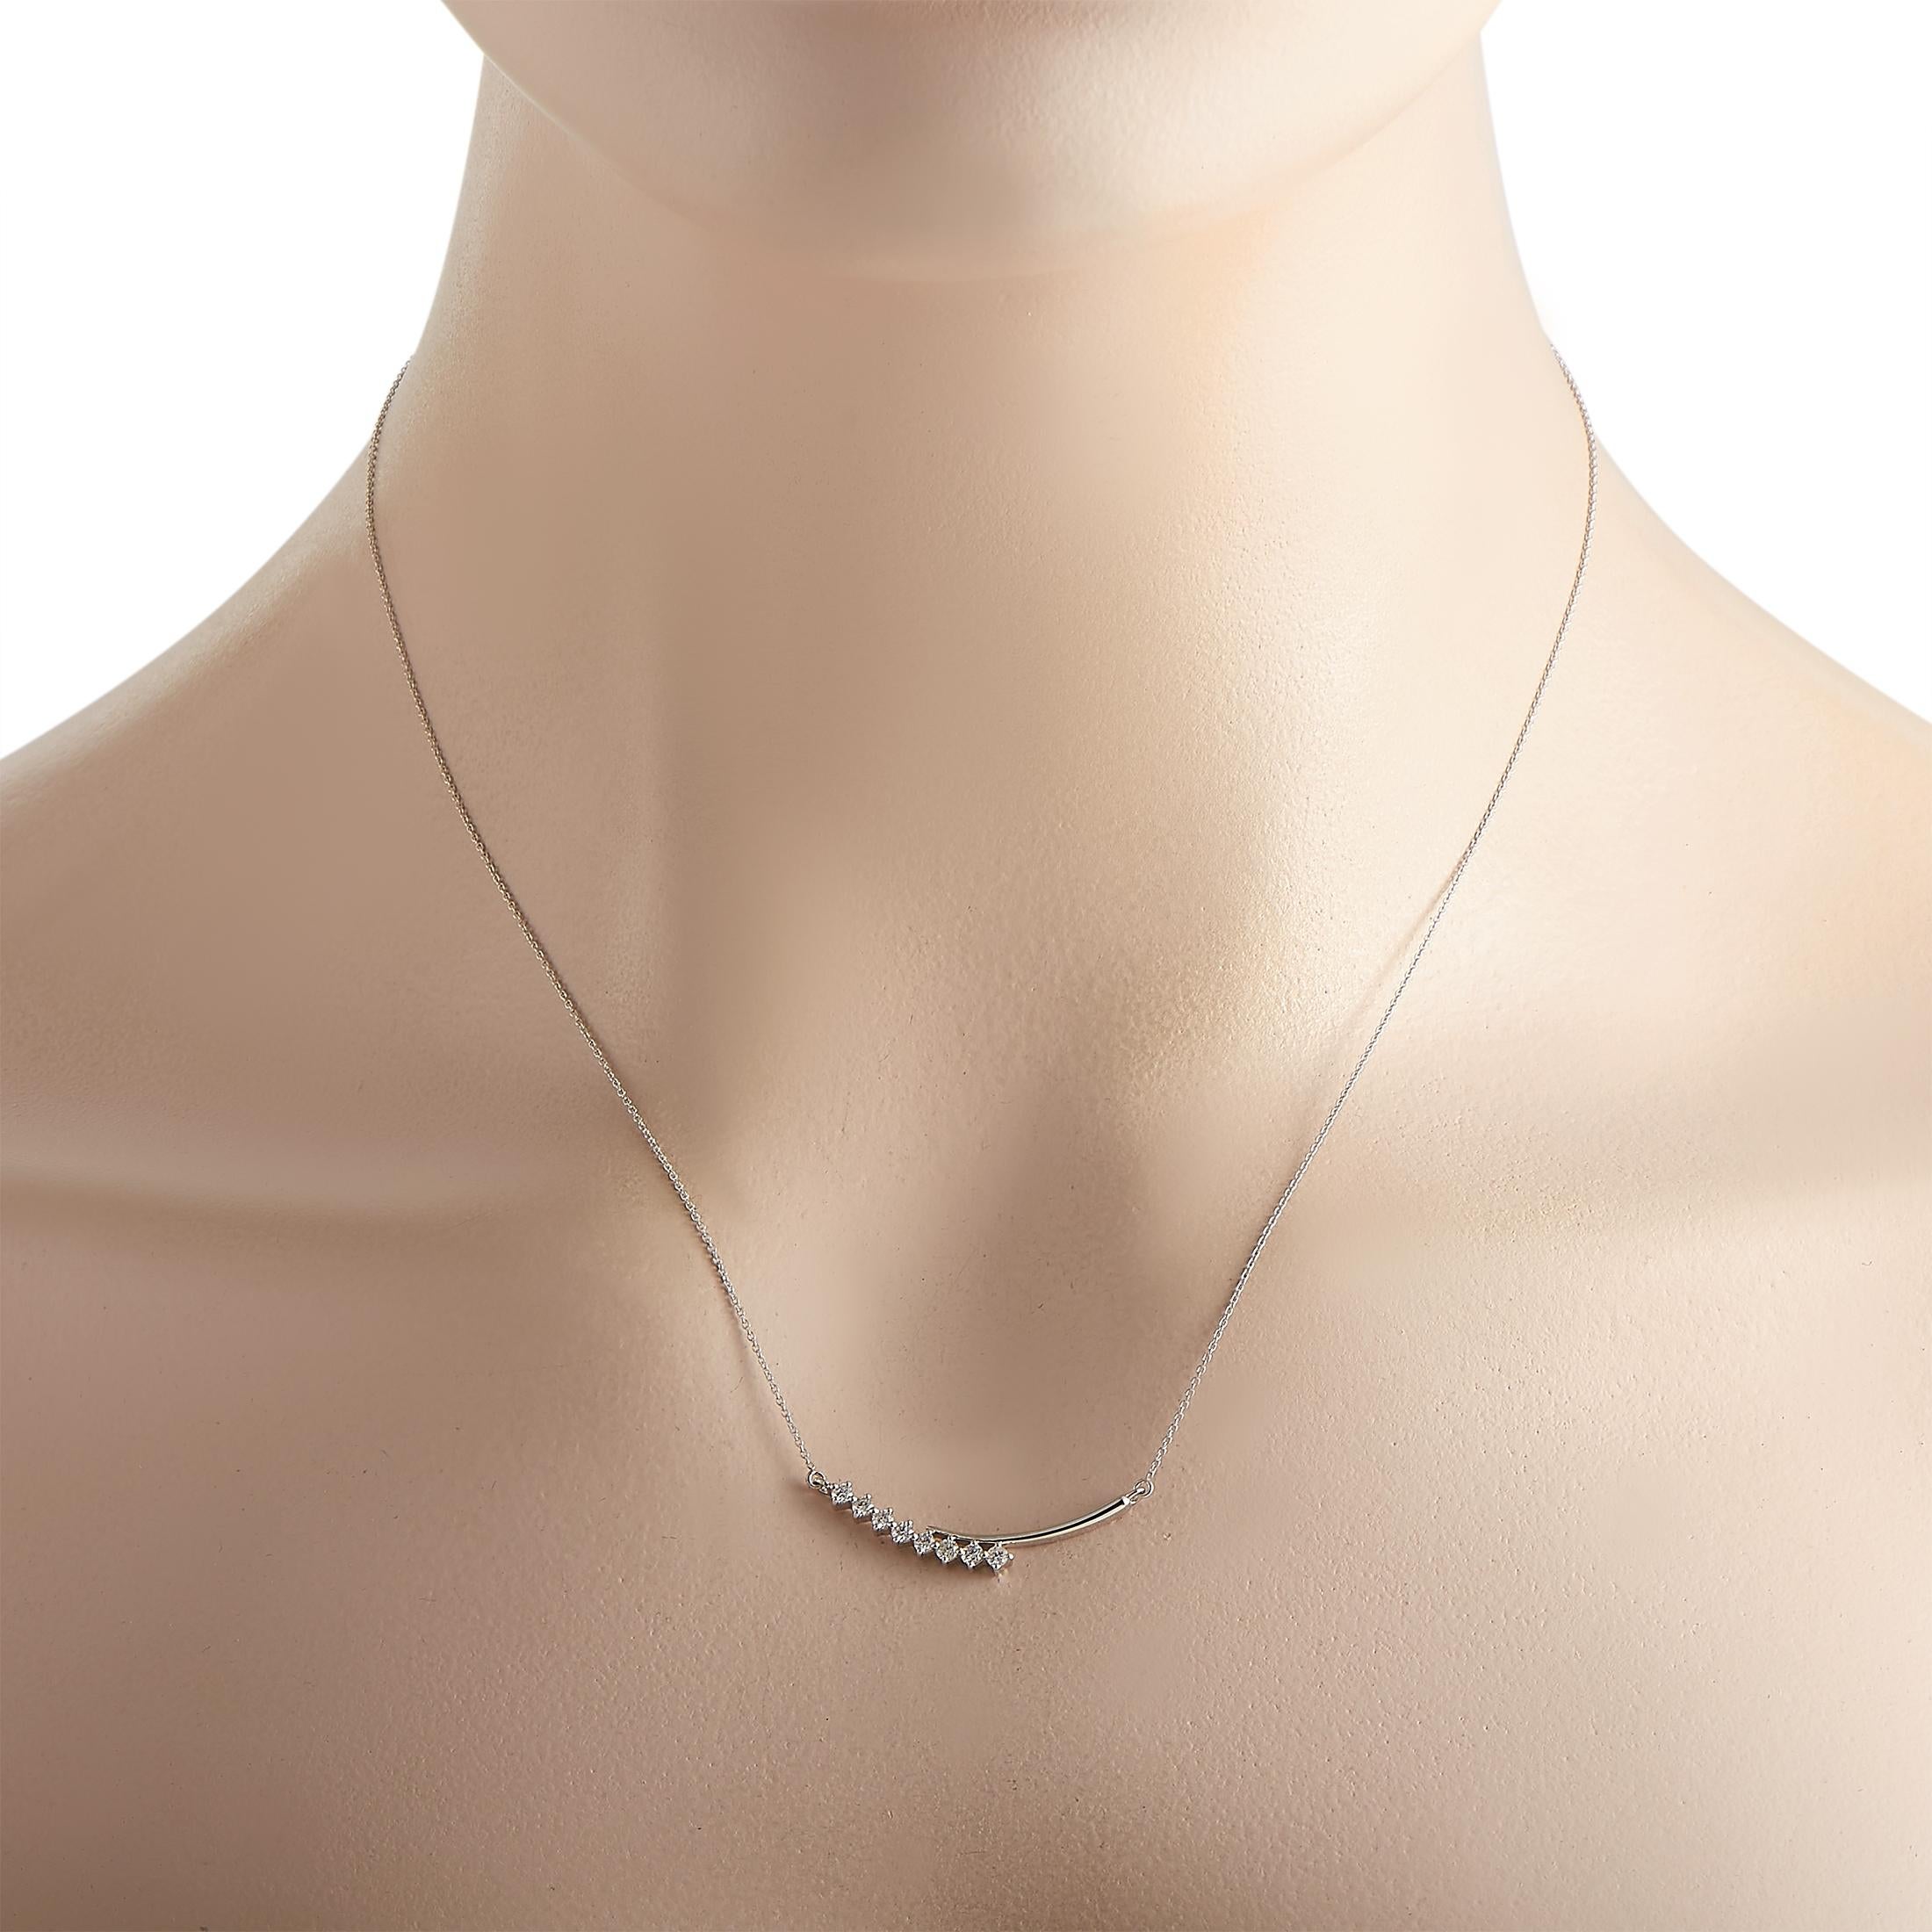 Graceful and breathtaking, this impeccable necklace will effortlessly enhance any ensemble. Suspended from a 16” chain, you’ll find a series of sparkling diamonds totaling 0.26 carats paired with a sleek 14K White Gold accent. A pendant measuring